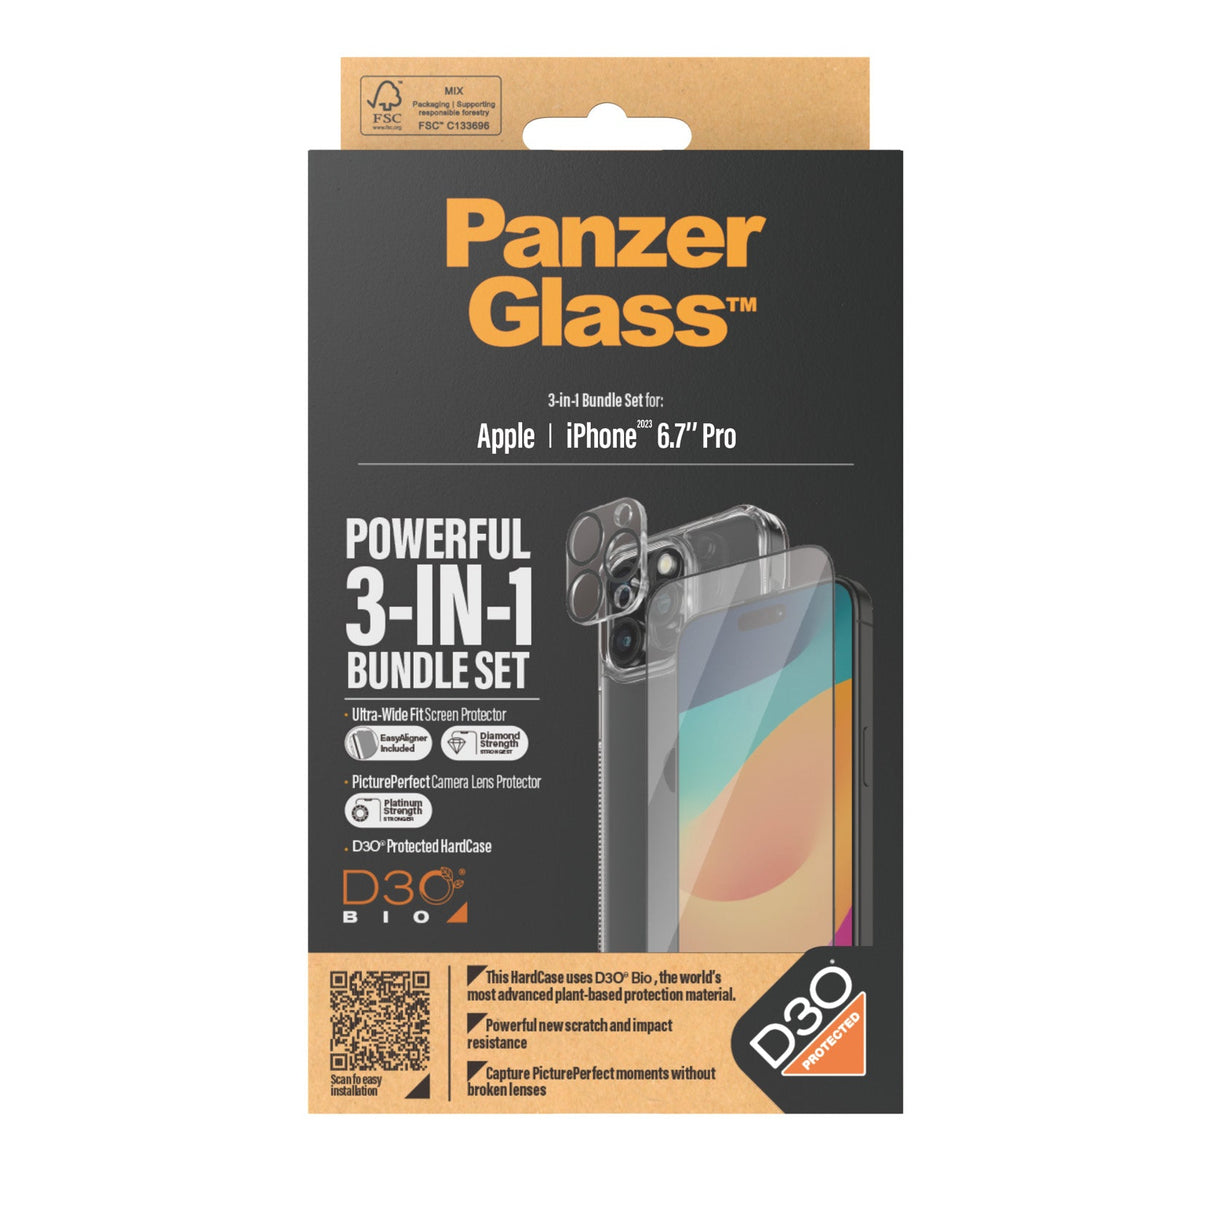 PanzerGlass iPhone 15 Pro Max 6.7" | 360 Bundle with D3O® | Clear - 5711724211751 - Level UpPanzerGlassScreen Protector5711724211751